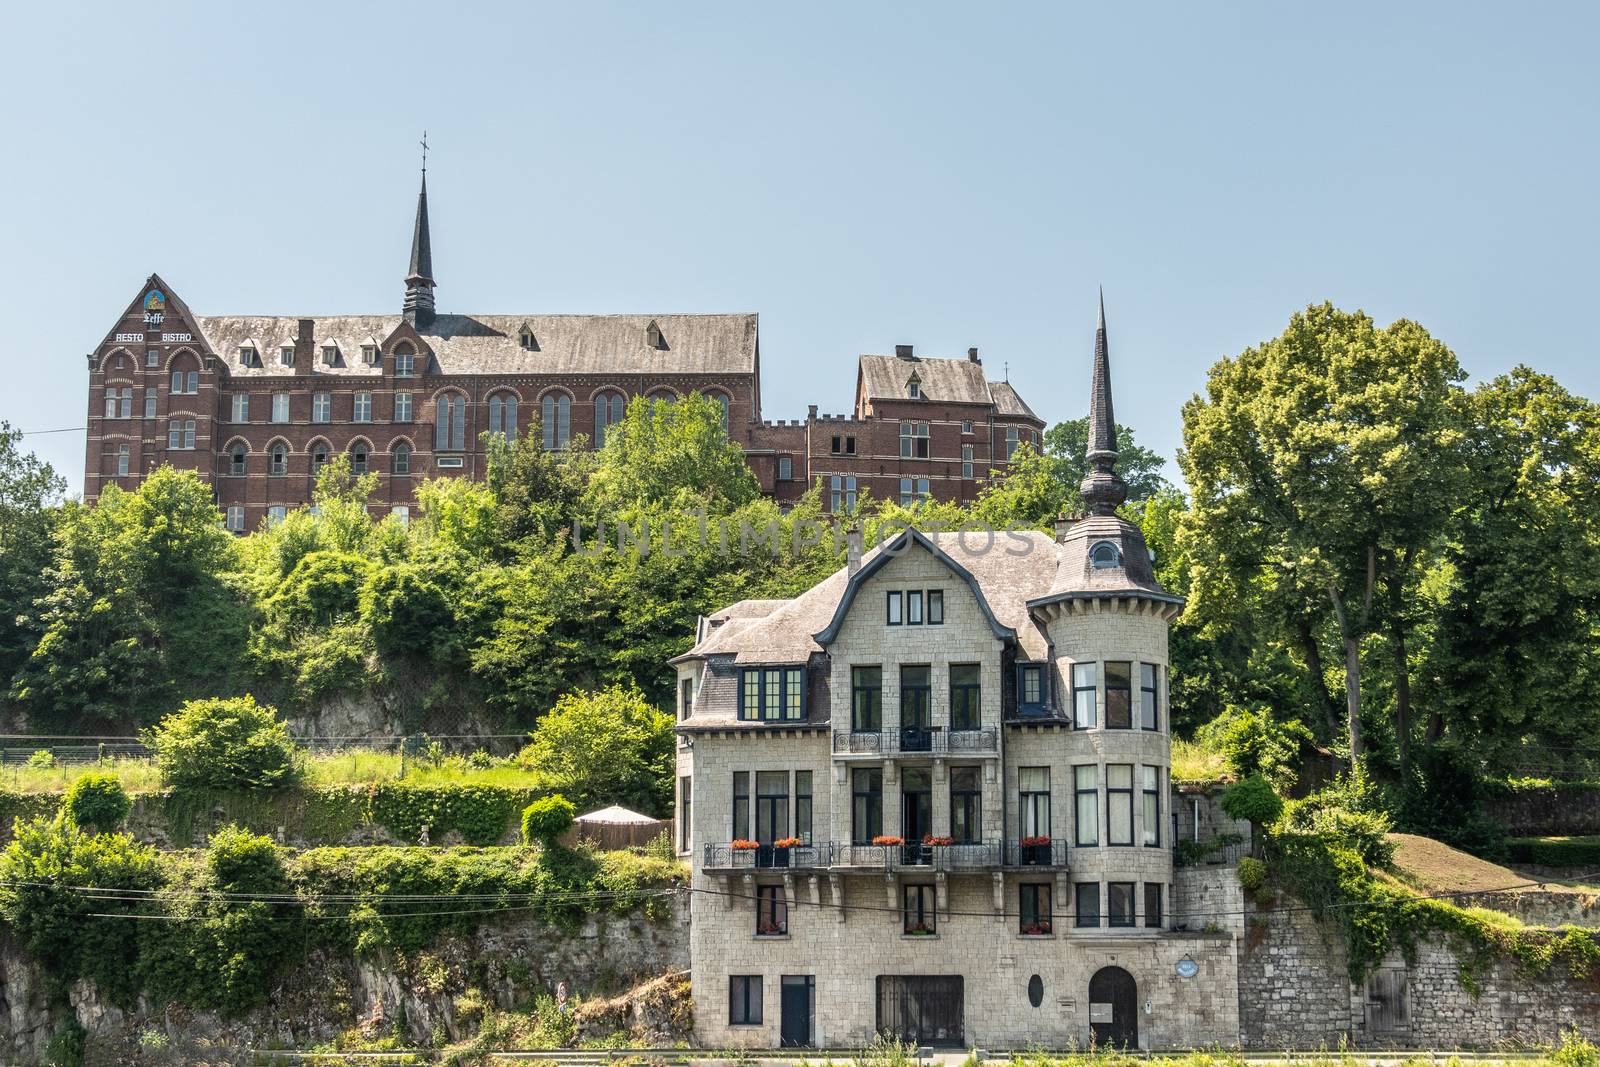 Dinant, Belgium - June 26, 2019: Red stone ancient convent of the Capuchins, now hotel, museum and administratif building and Villa Mouchenne, top restaurant, in front. Blue sky, green foliage.